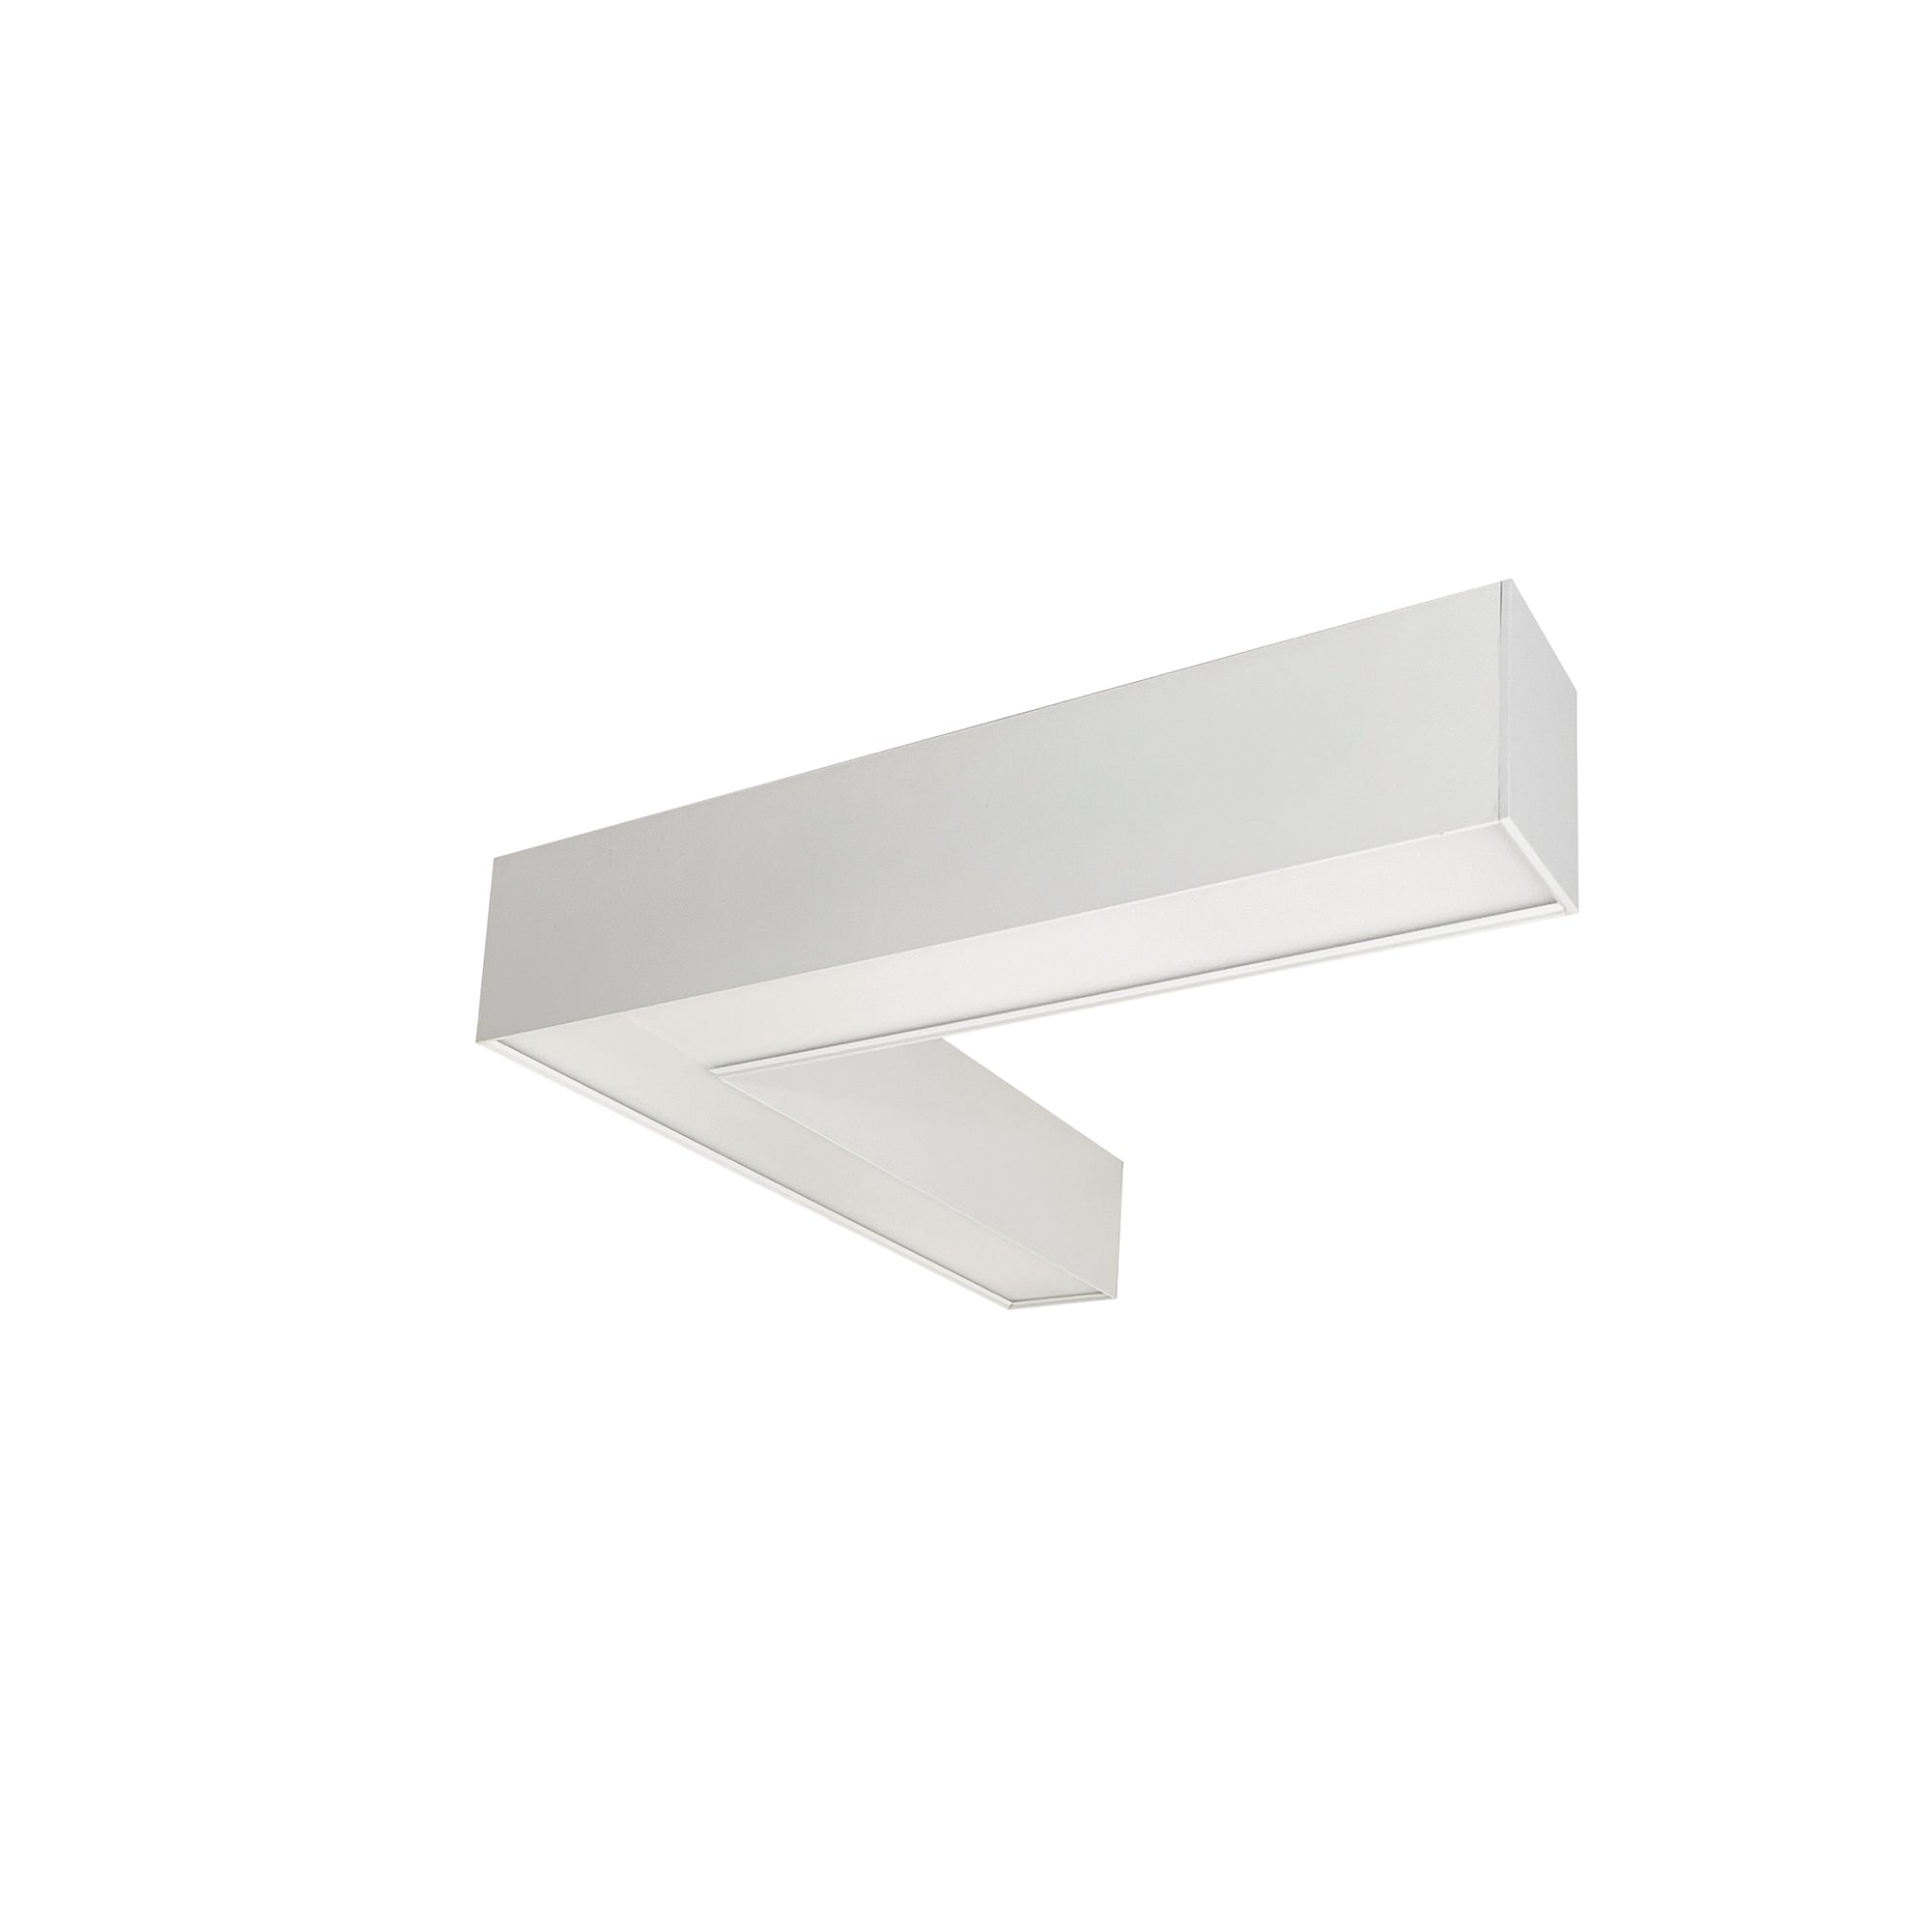 Nora Lighting NLUD-L334W - Linear -  InchL Inch Shaped L-Line LED Indirect/Direct Linear, 3781lm / Selectable CCT, White Finish